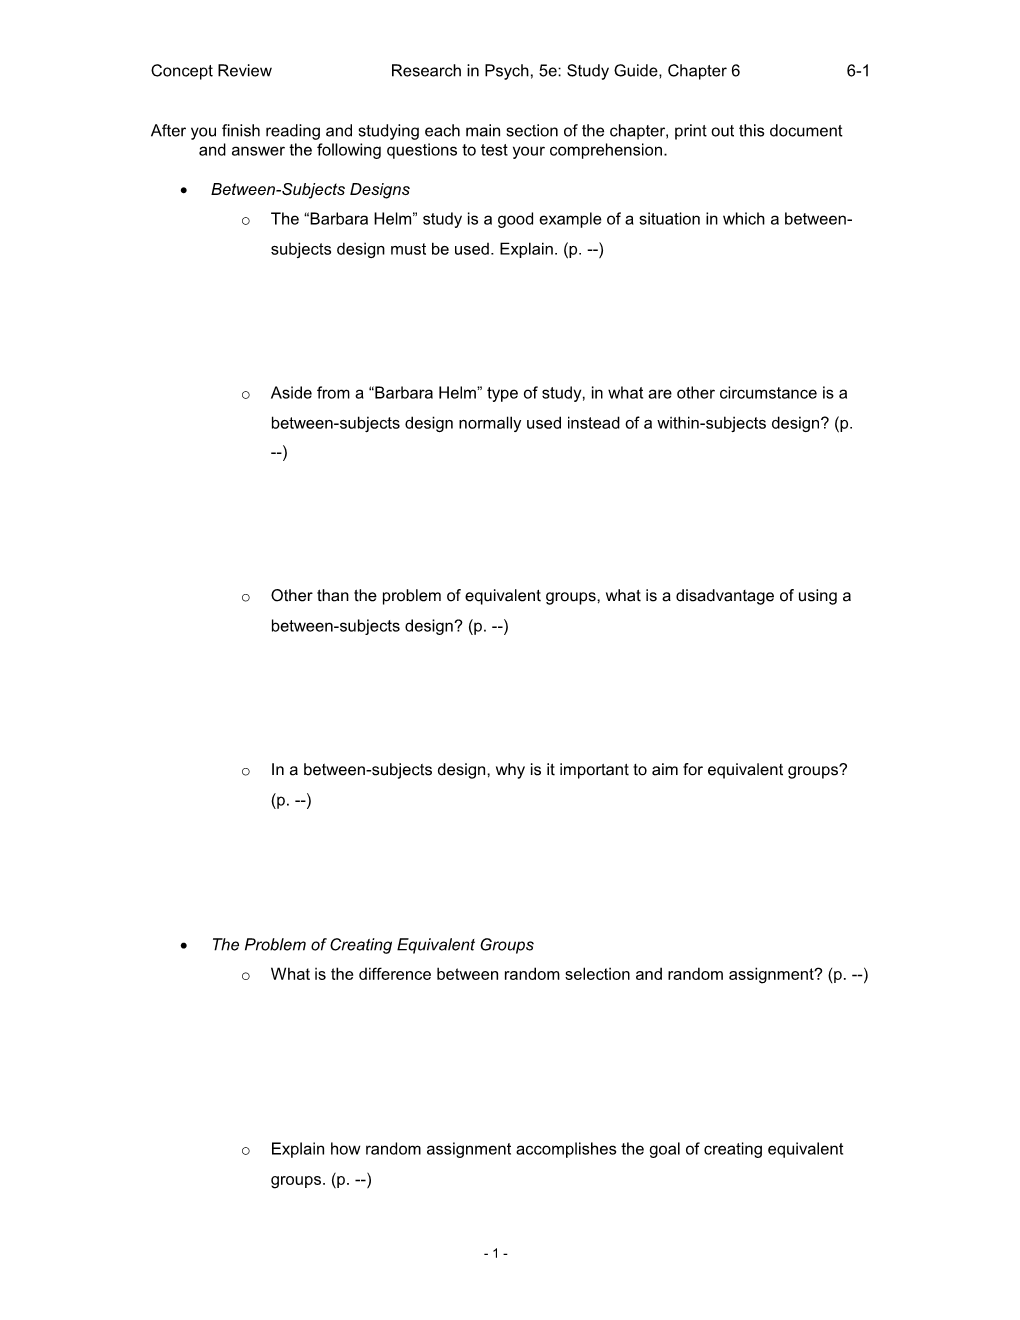 Concept Review Research in Psych, 5E: Study Guide, Chapter 6 6-5